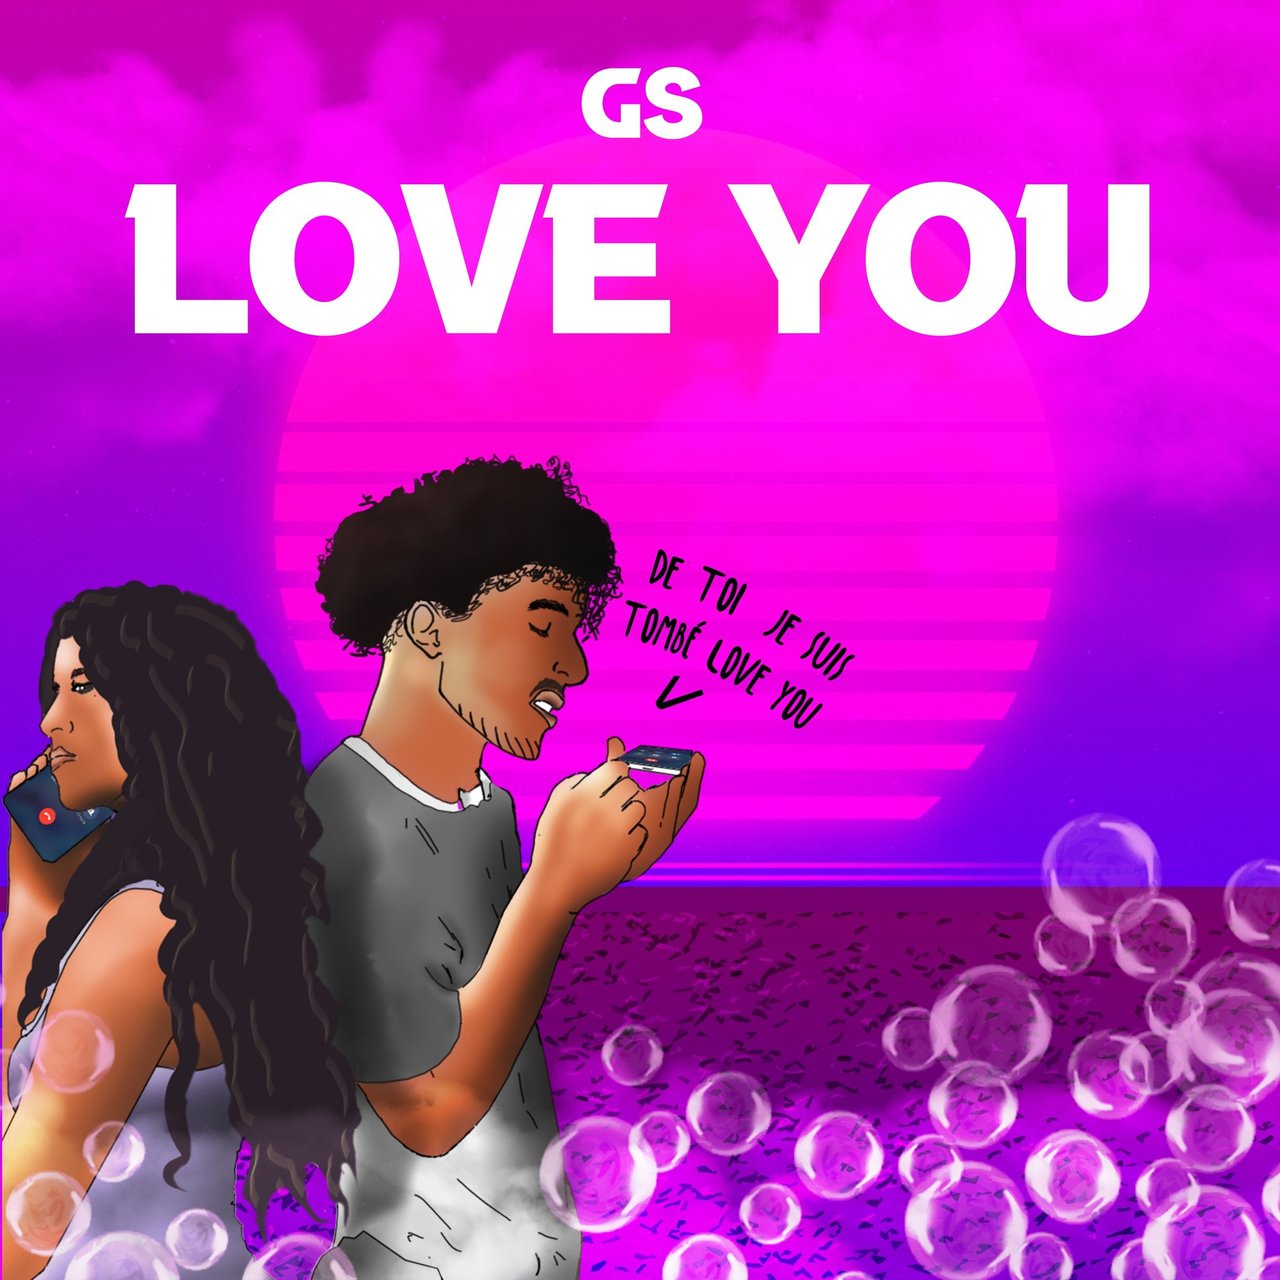 GS - Love You (Cover)